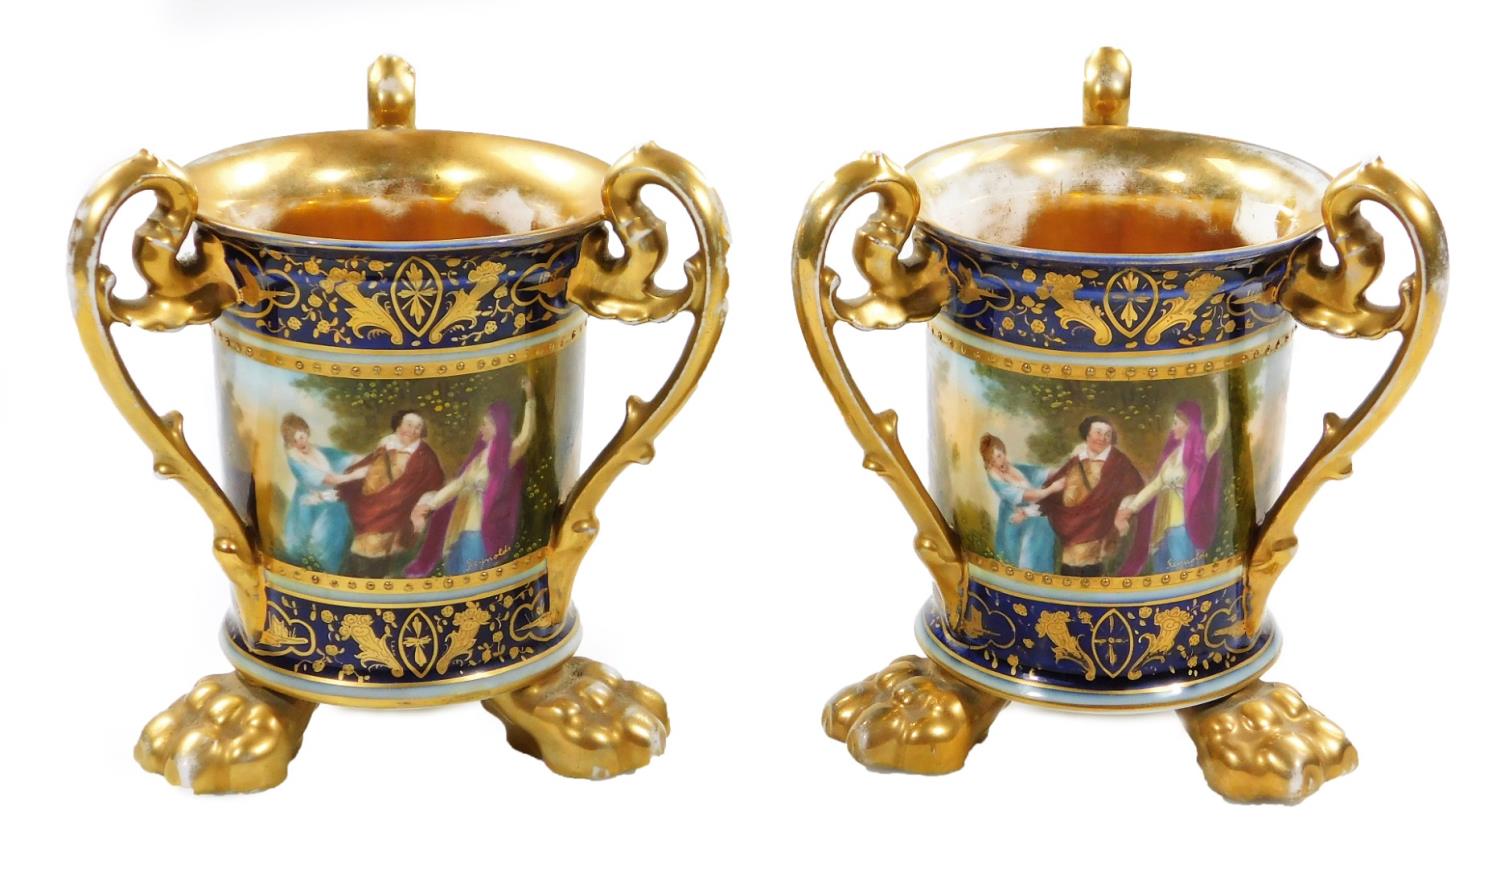 A pair of 19thC Vienna porcelain tyg vases, each of inverted cylindrical form, with floral scroll